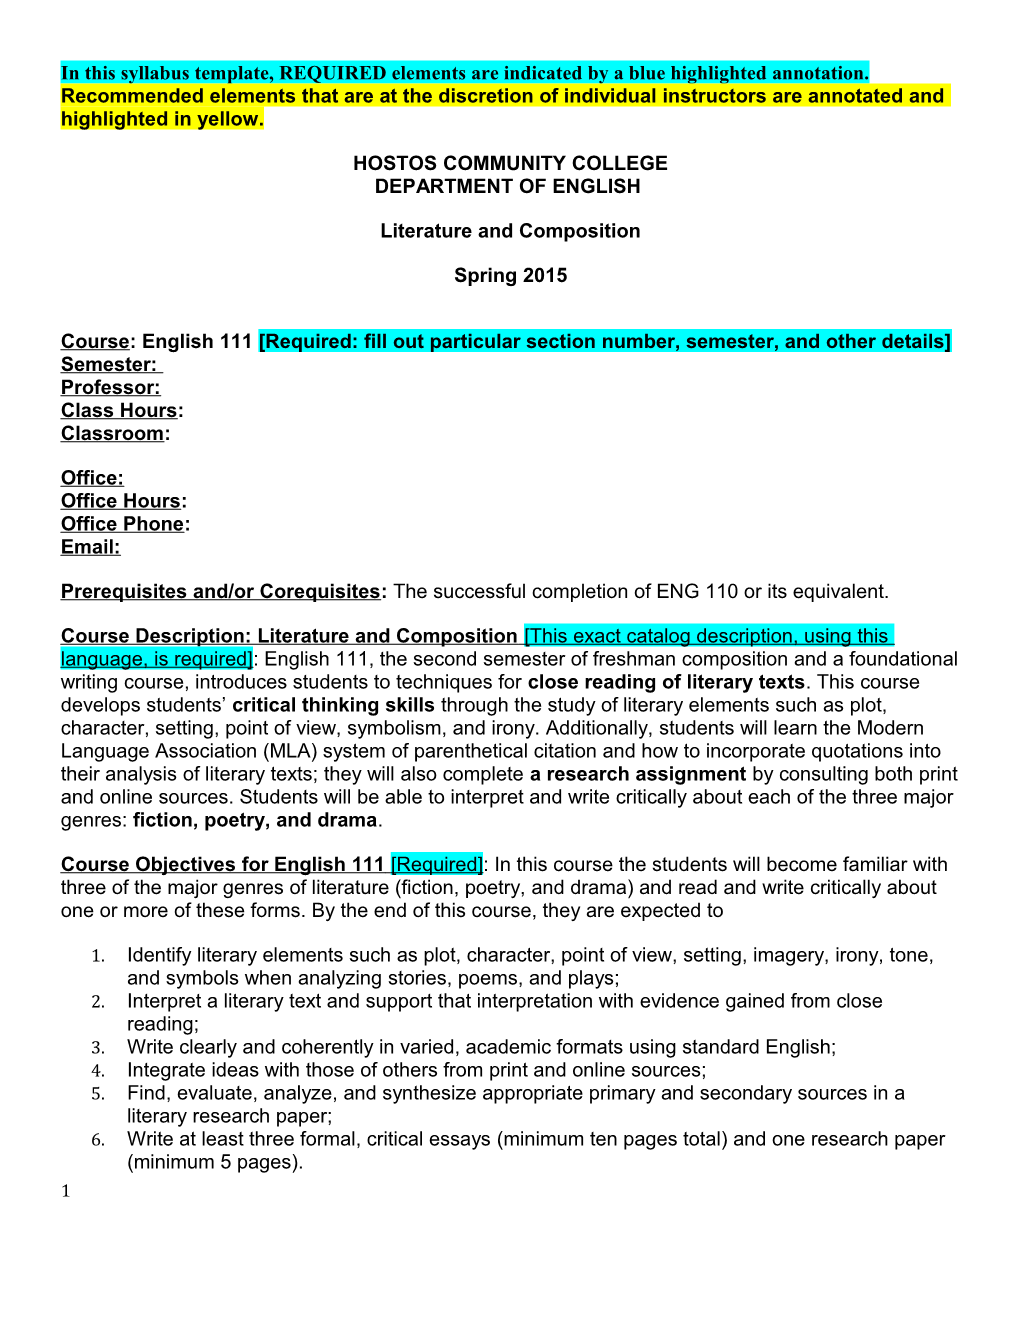 Annotated Syllabus Shell, Spring 2015